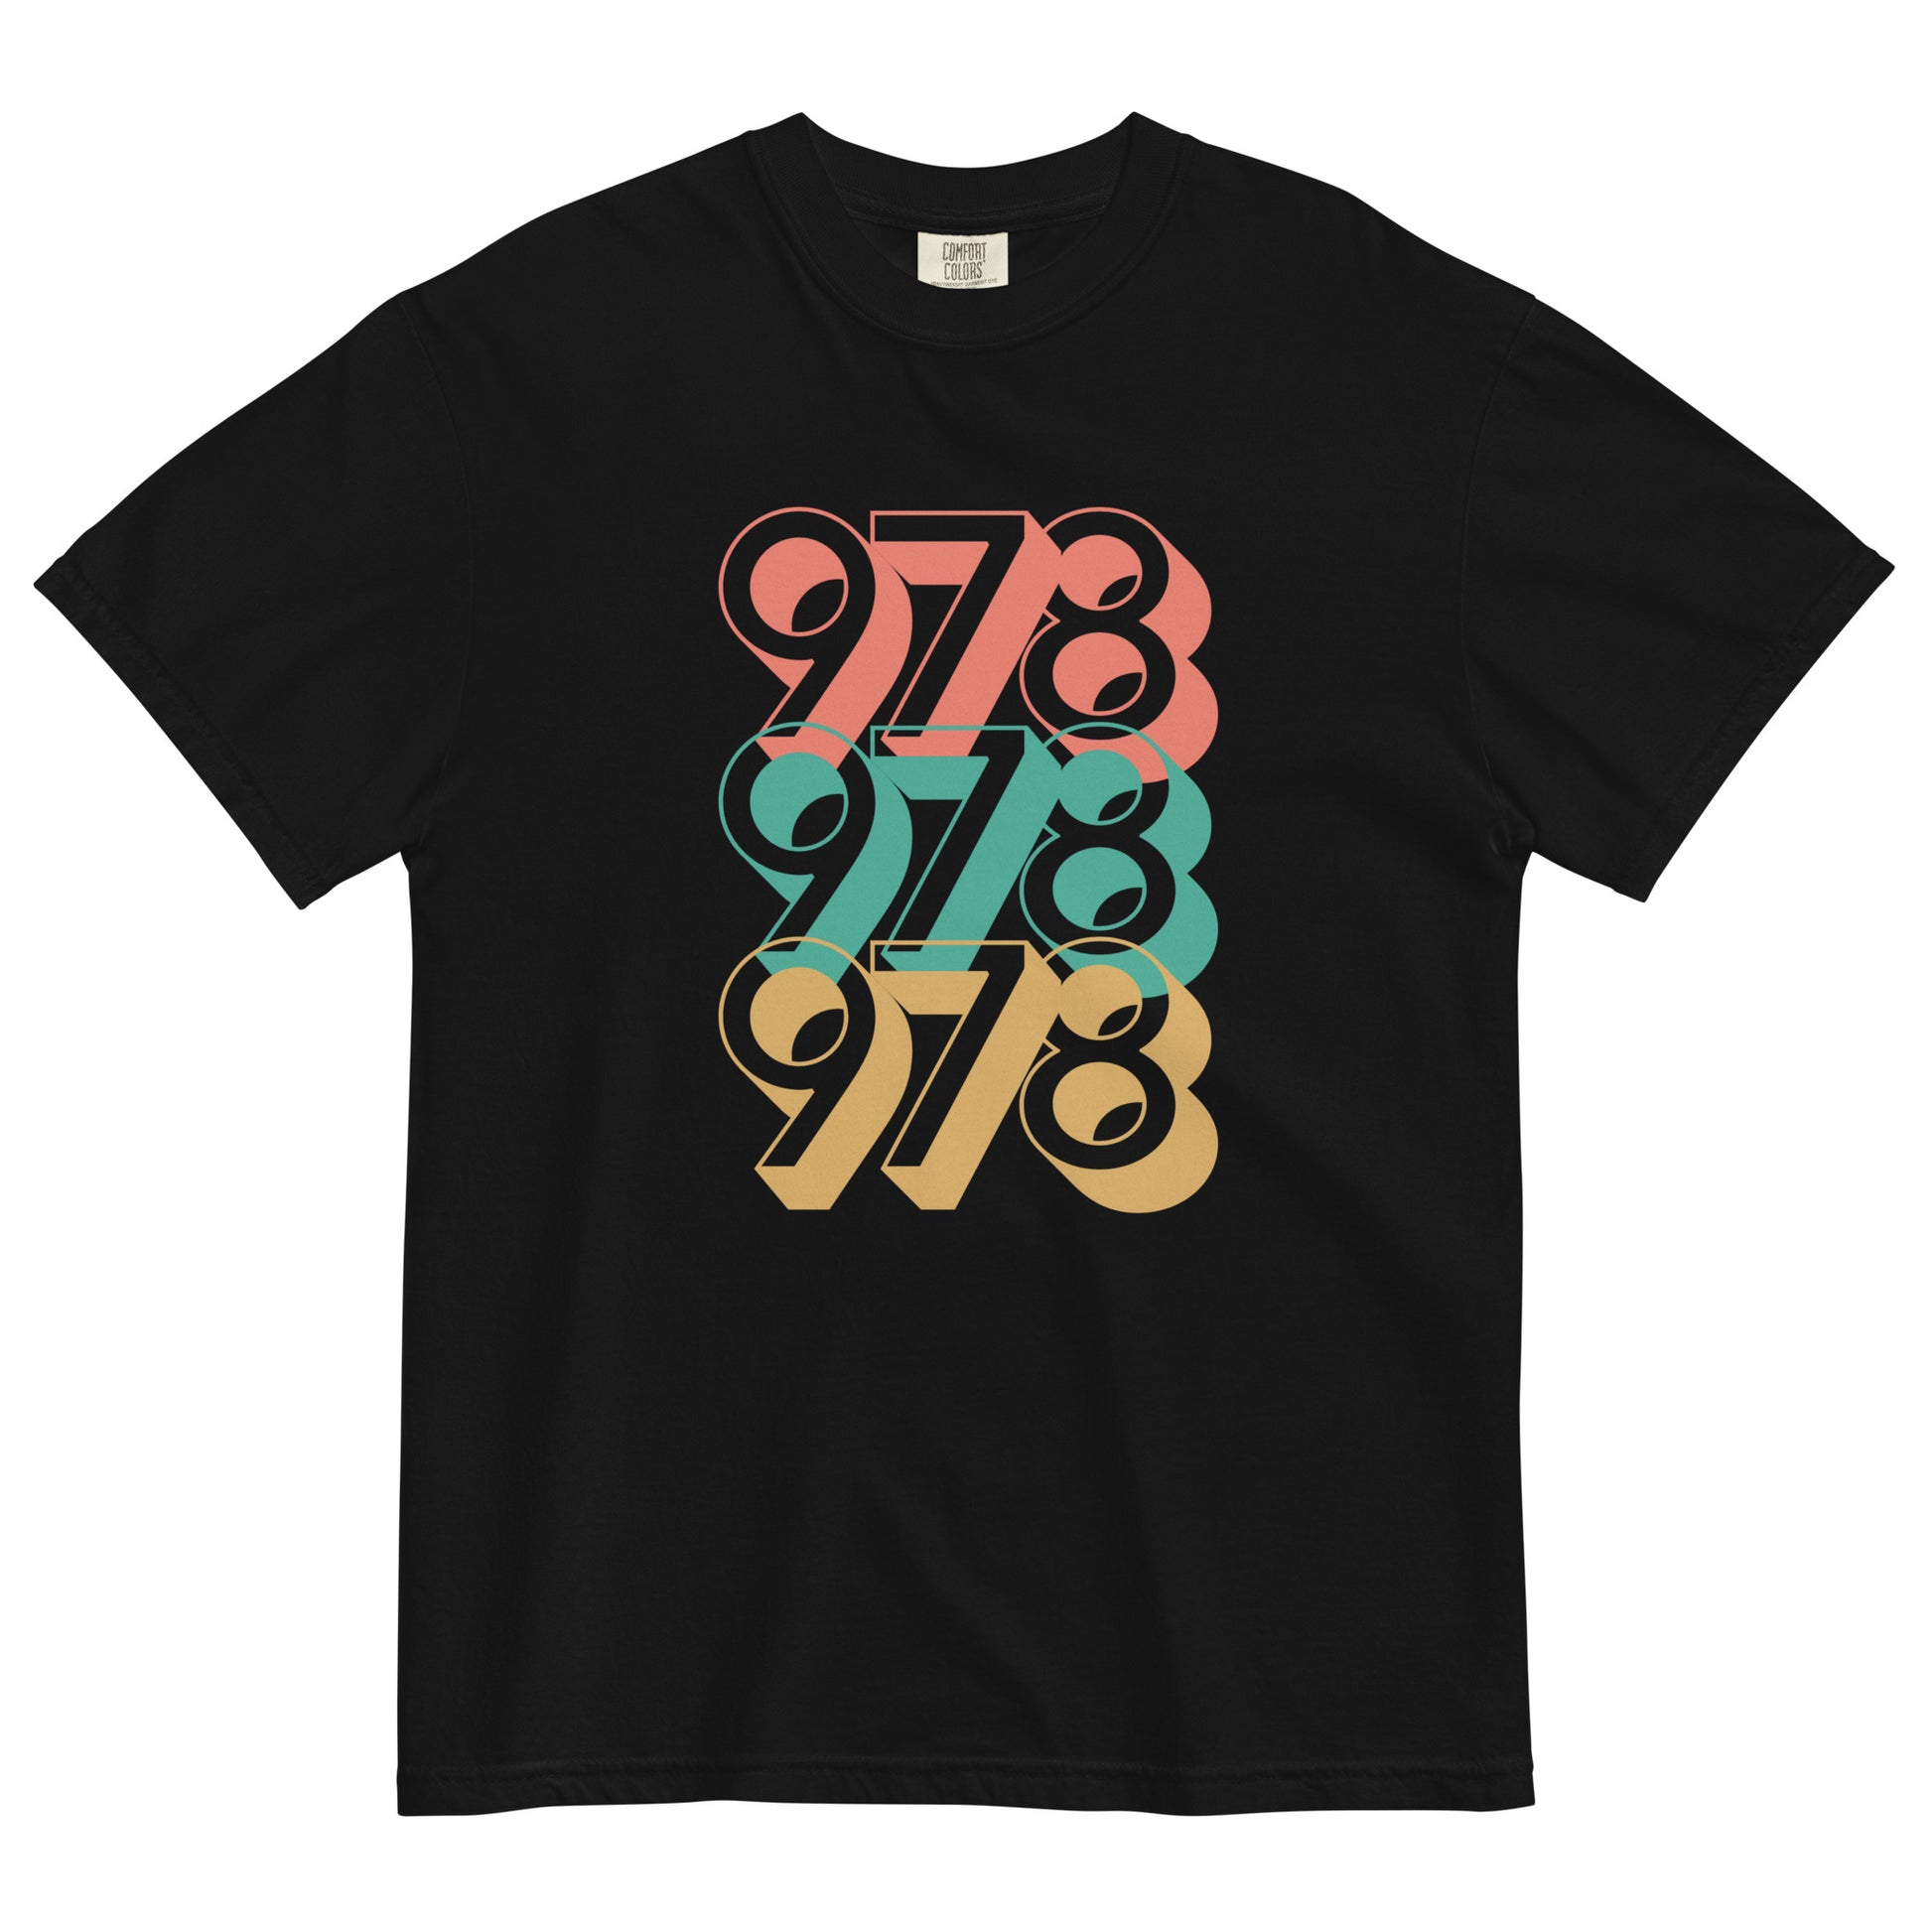 black tshirt with three 978s in red green and yellow